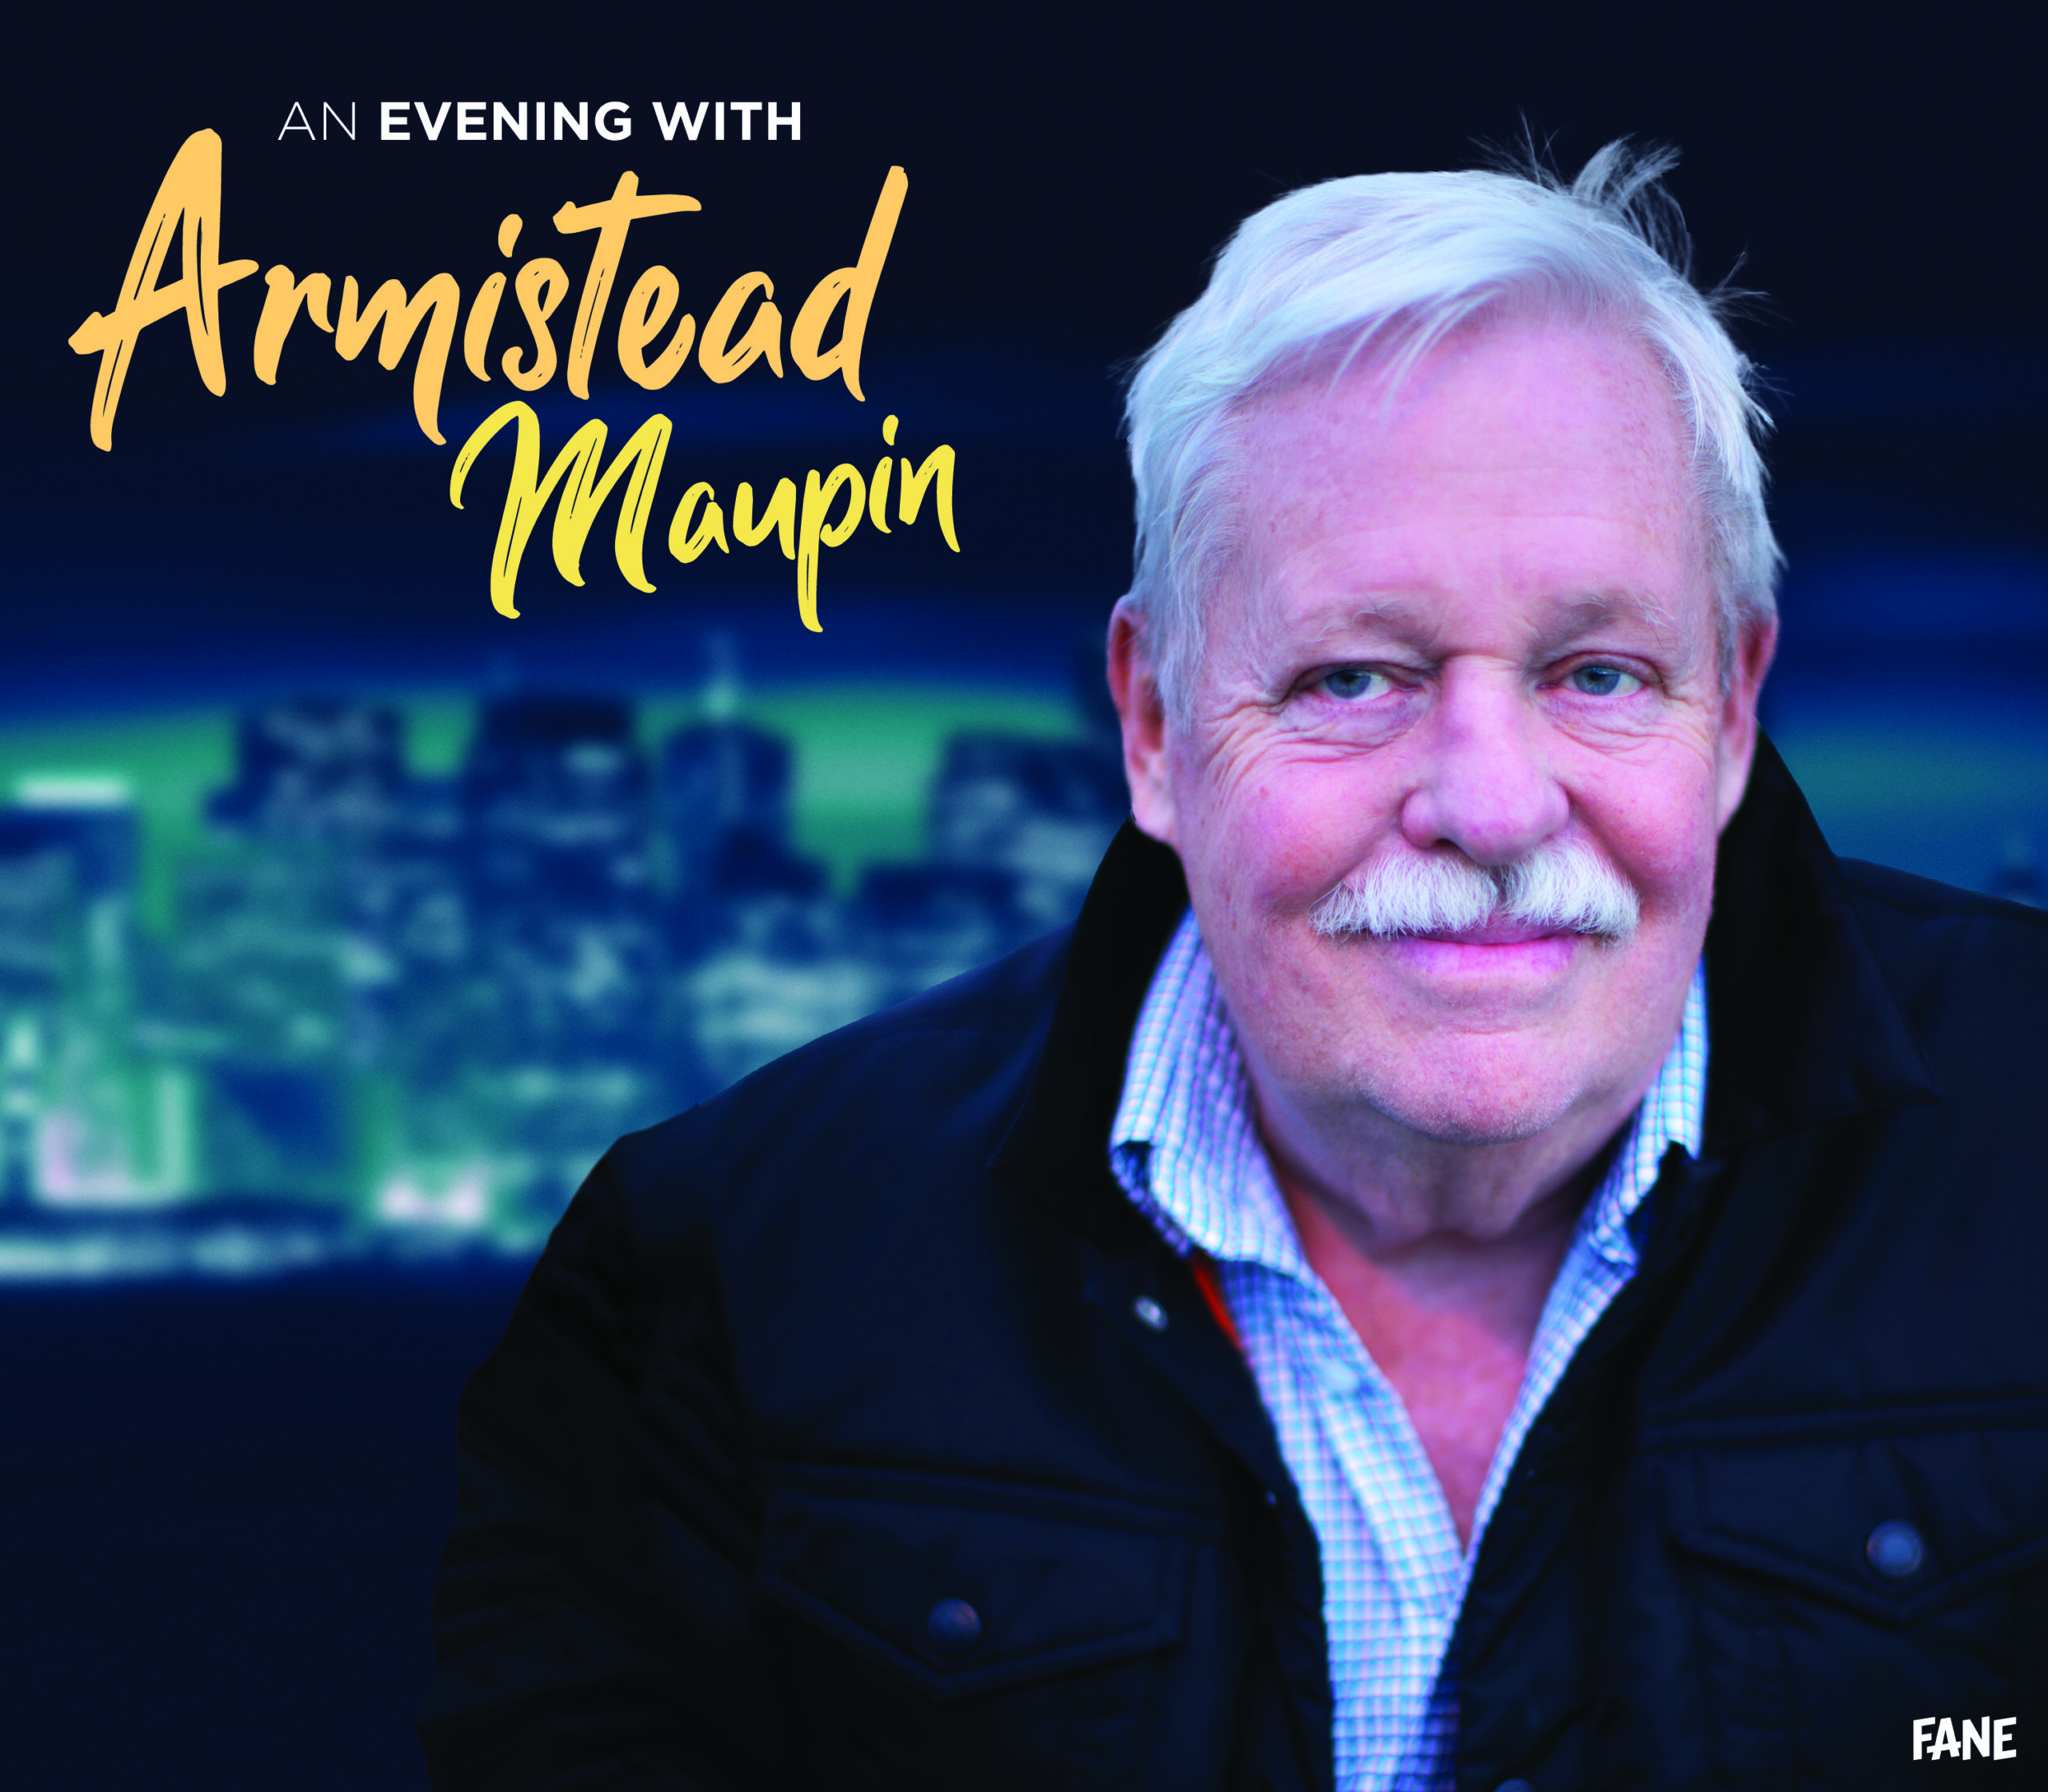 Author and LGBT activist Armistead Maupin is heading back out on the ...